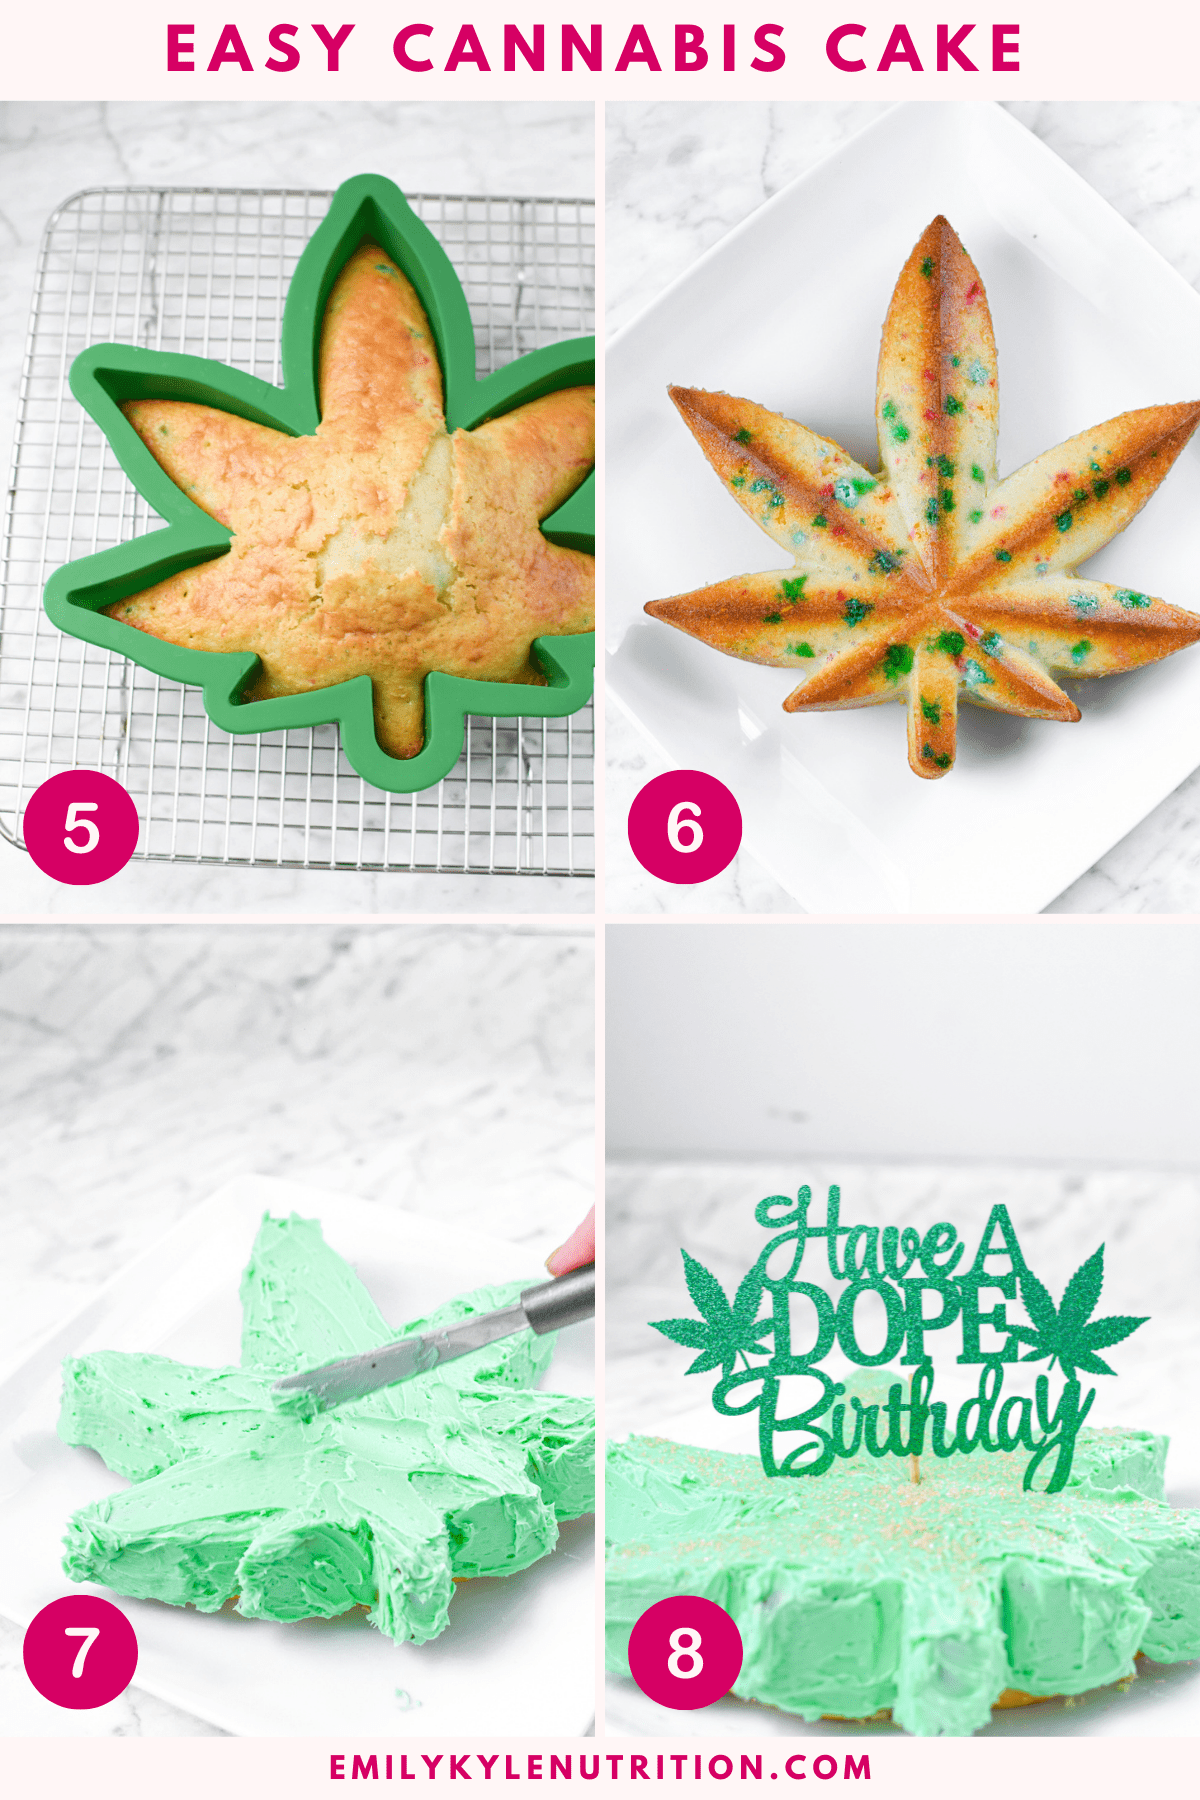 The last four steps needed to make a cannabis cake.